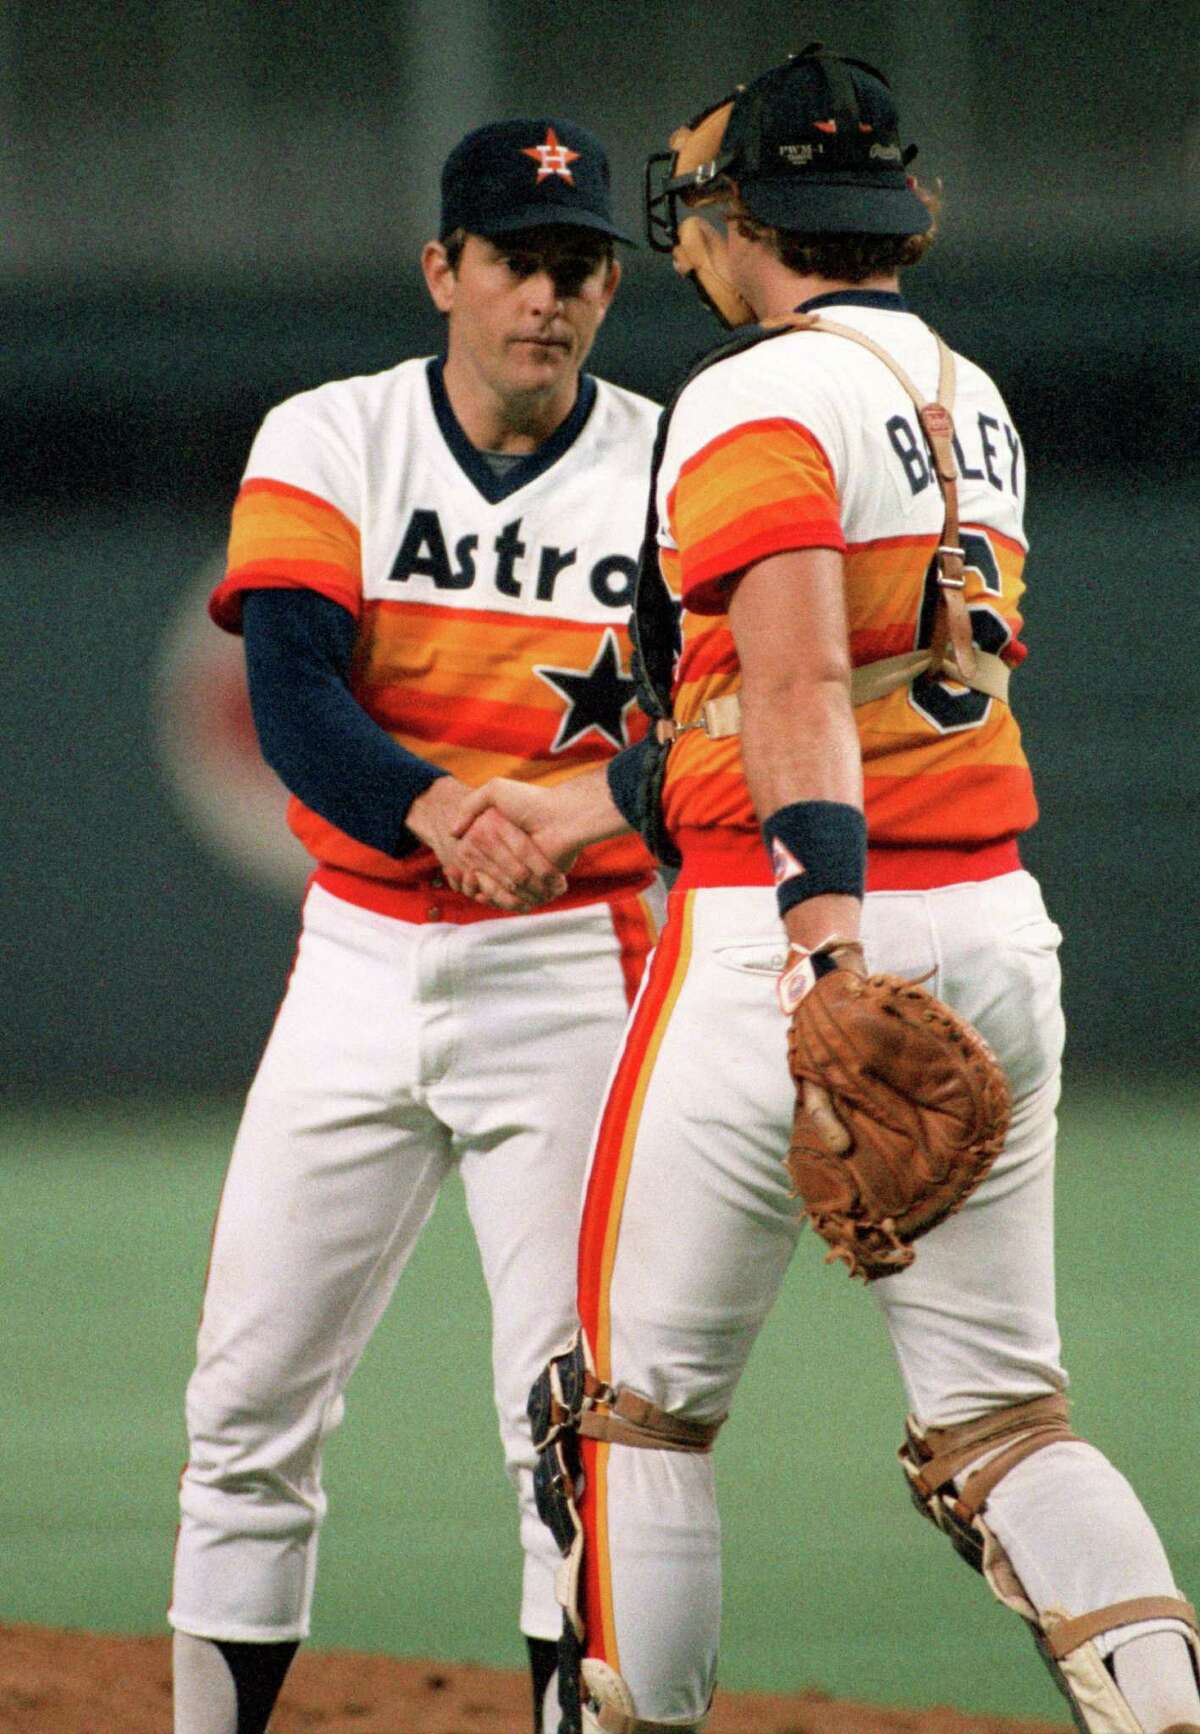 Mike Acosta on X: Another nice job on tonight's 1977 Astros